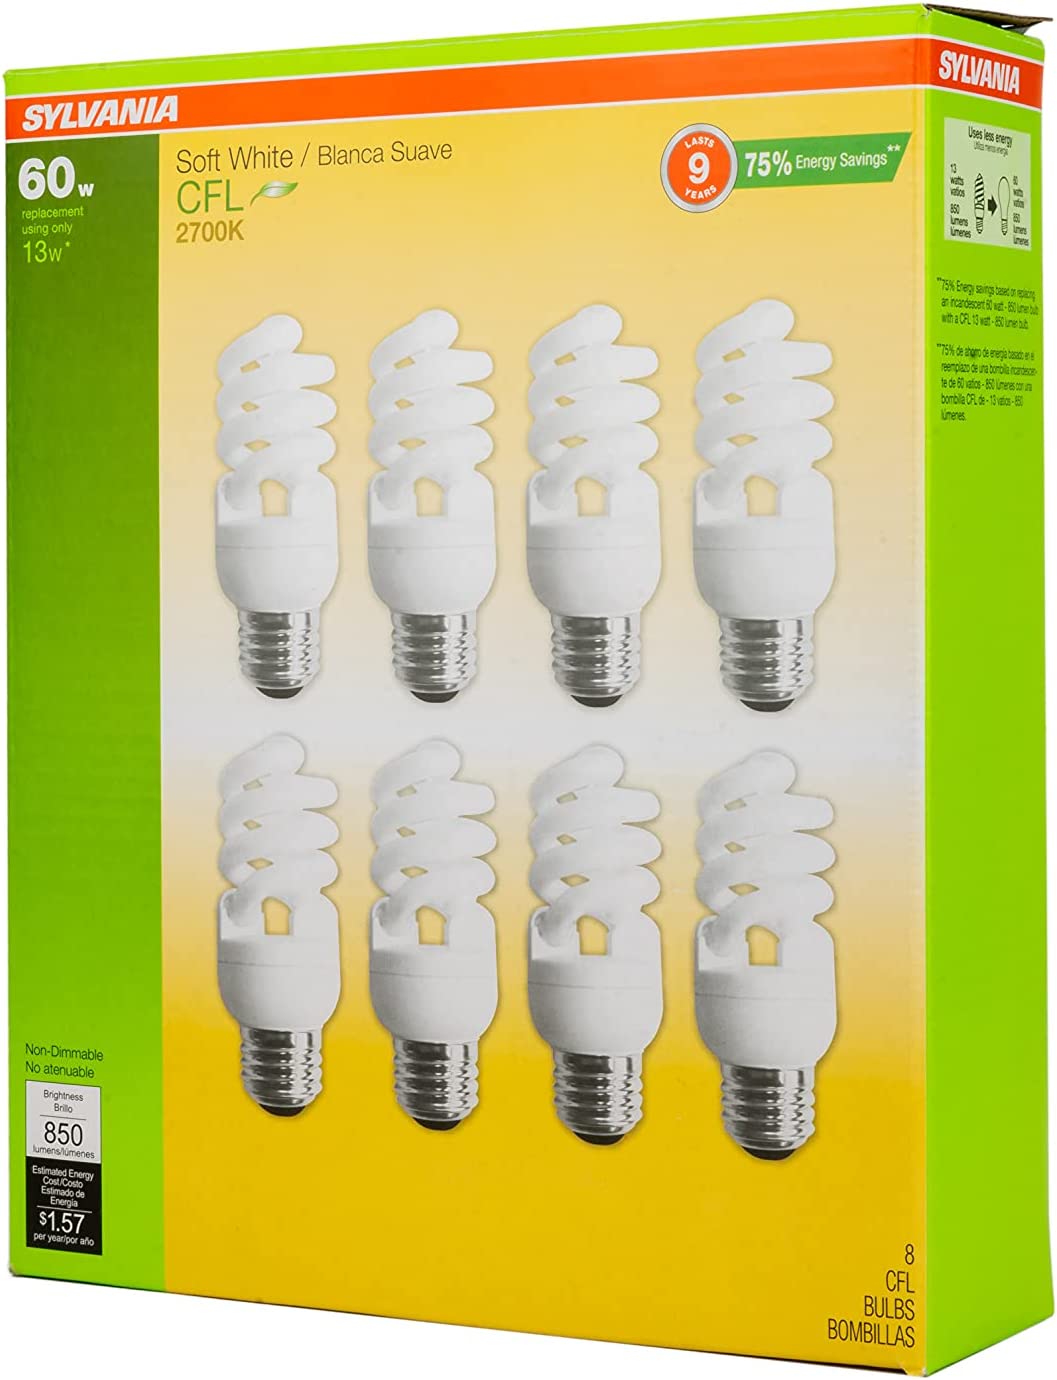 13W CFL T2 Spiral Light Bulb, 60W Equivalent, 850 Lumens, 2700K Soft White, Non-Dimmable (8-Pack)